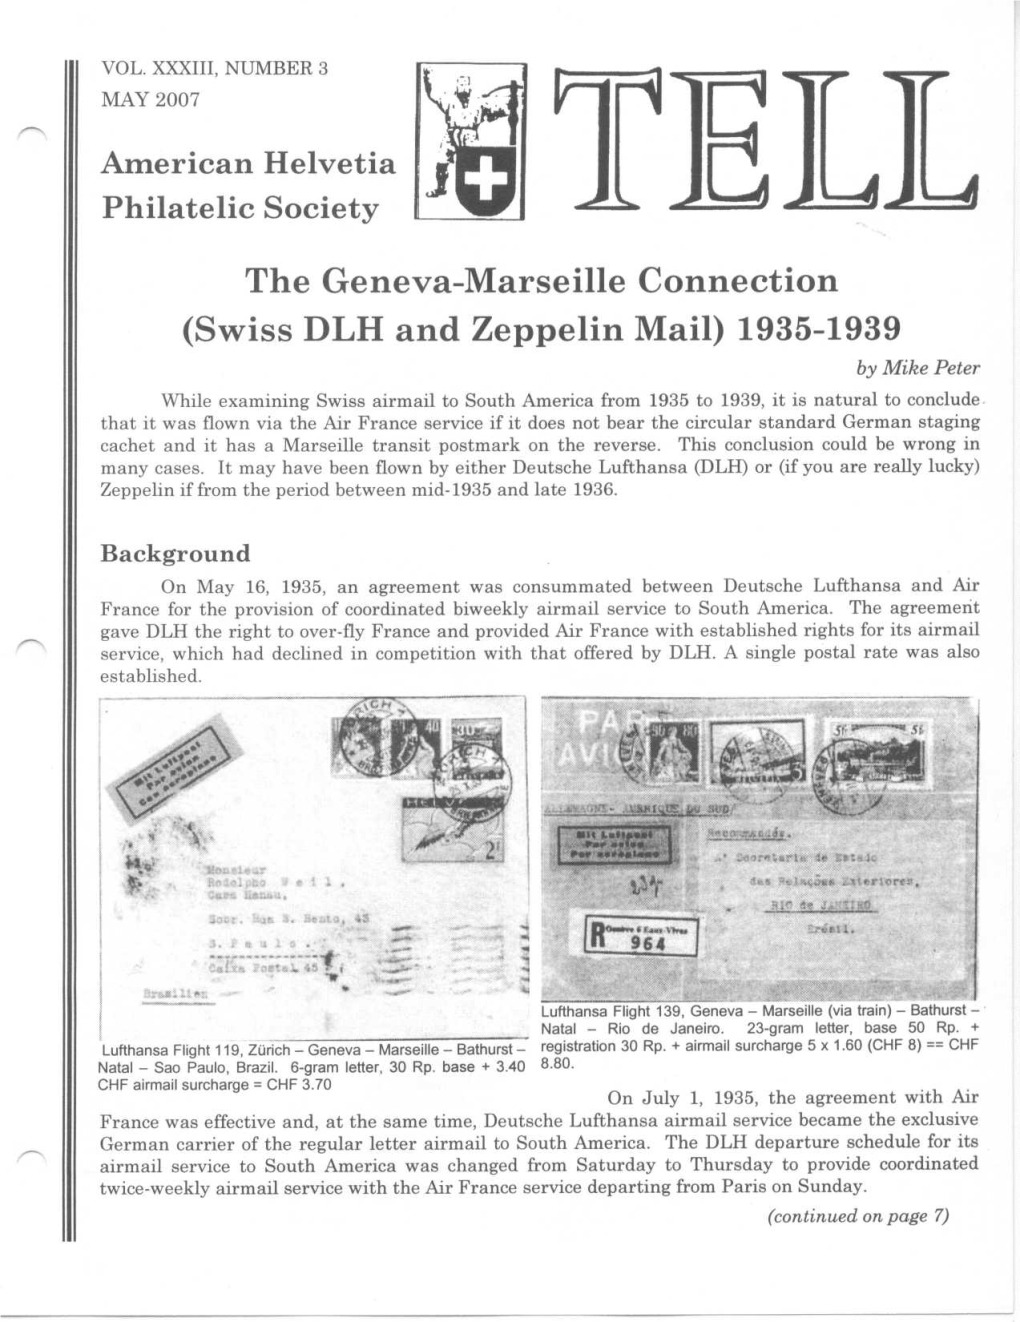 American Helvetia Philatelic Society the Geneva-Marseille Connection (Swiss DLH and Zeppelin Mail) 1935-1939